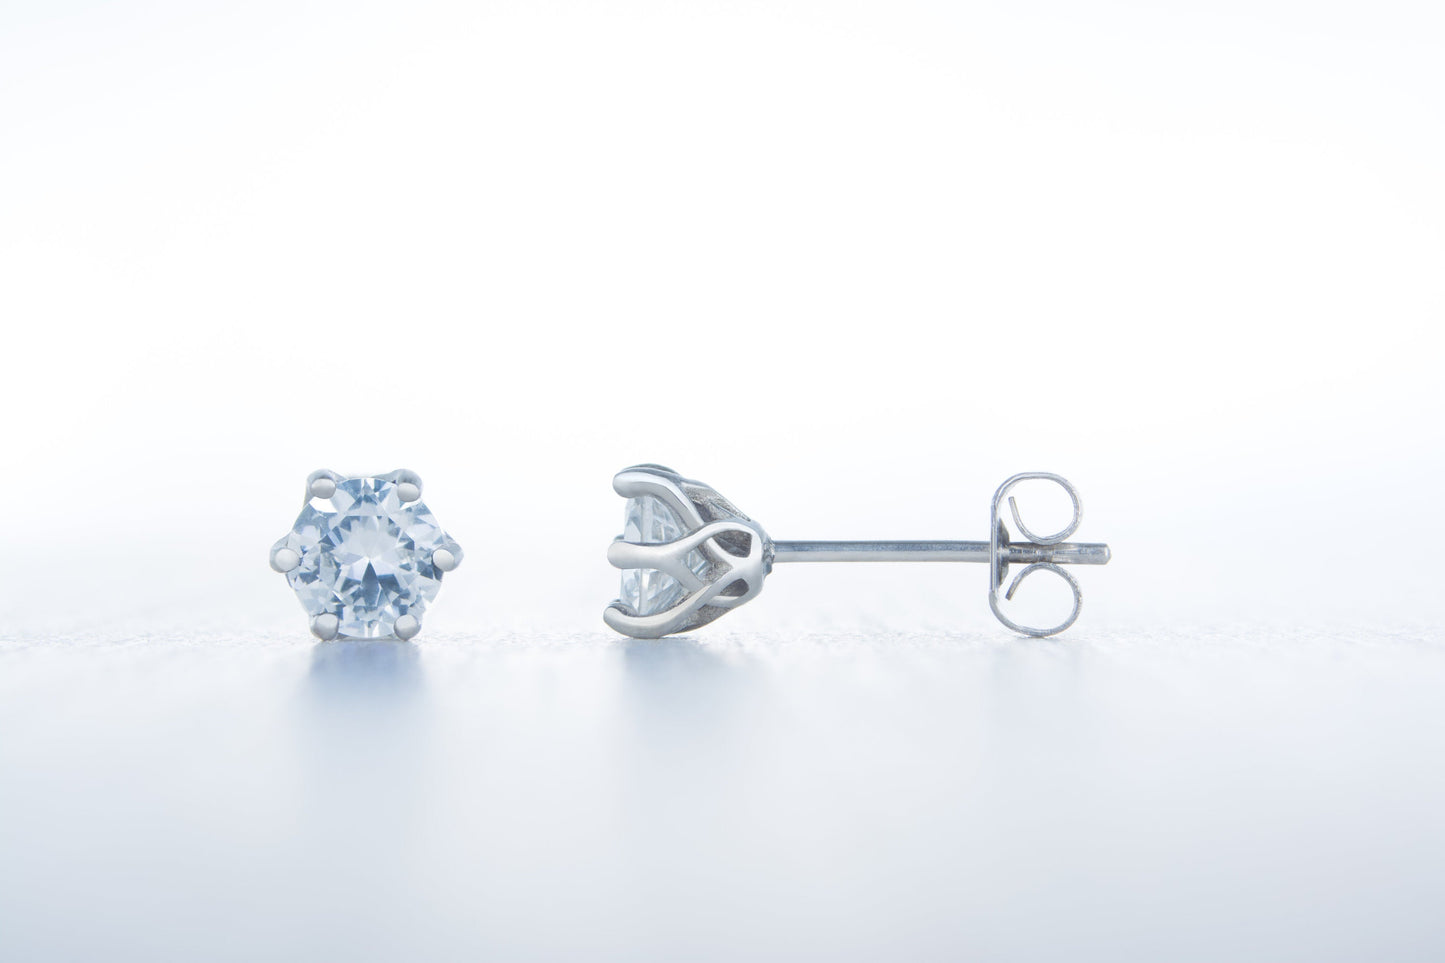 European Cut Man Made Diamond Simulant stud earrings, available in titanium, white gold and surgical steel 4mm, 5mm or 6mm sizes